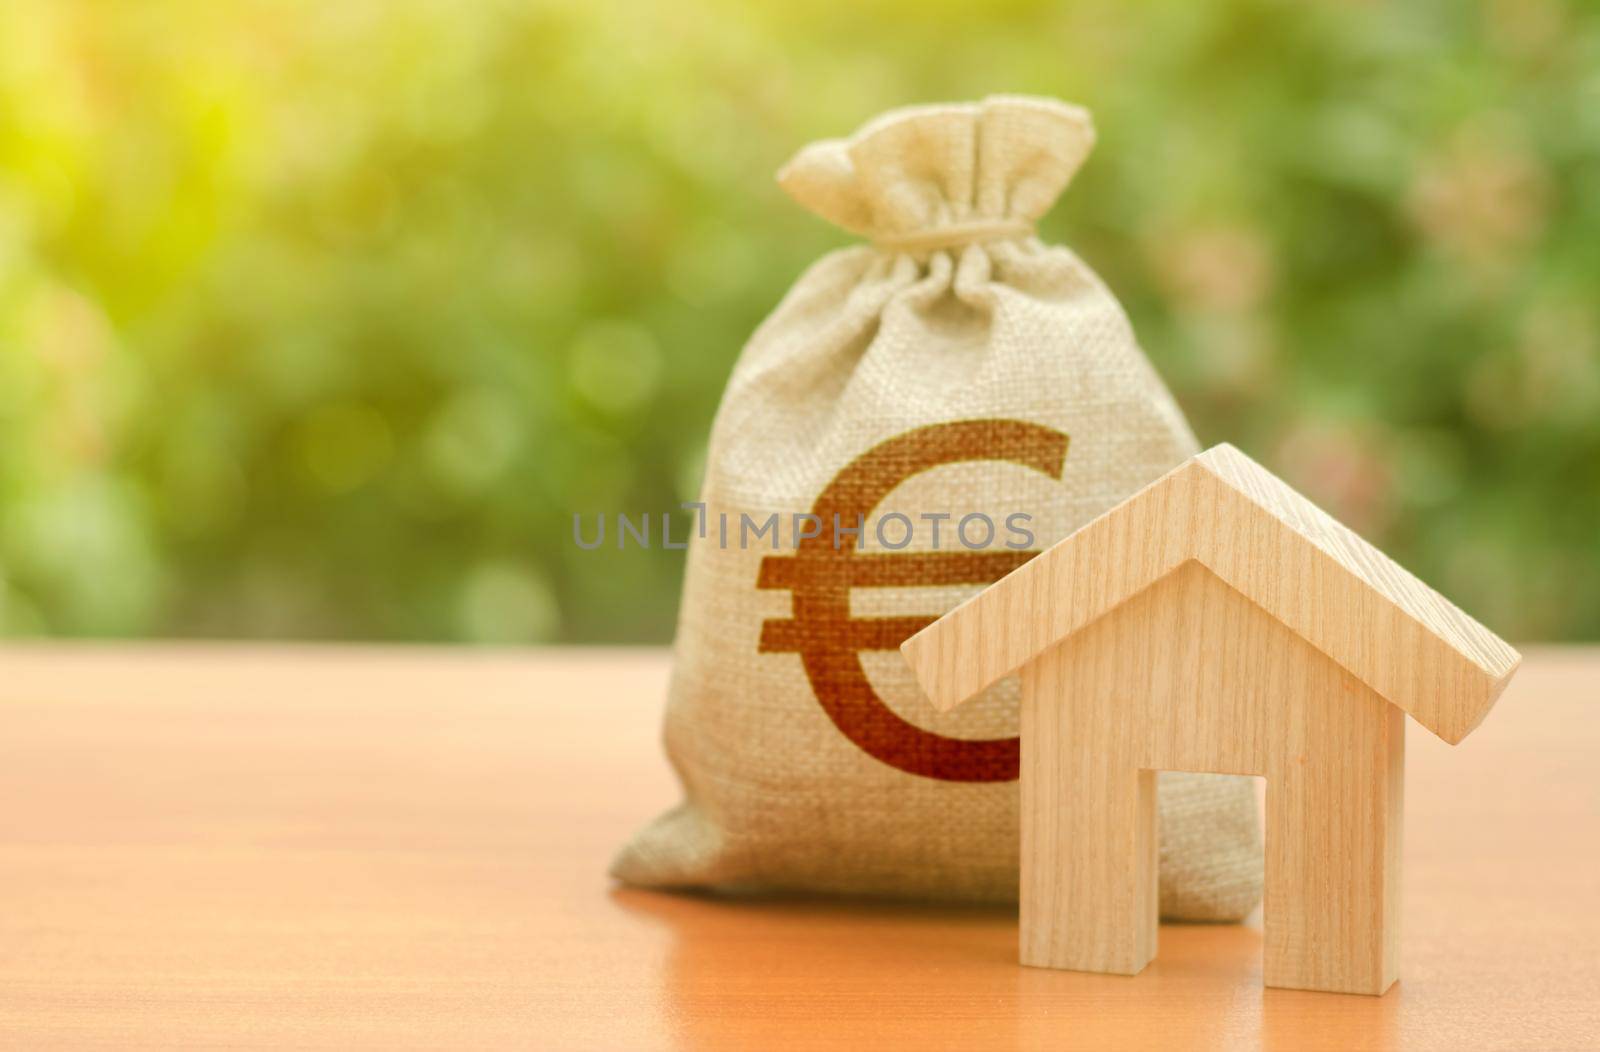 Wooden house figurine and Euro money bag on the background of nature. Budget, subsidized funds. Mortgage loan for the purchase of housing, construction or modernization. Tax, building maintenance. by iLixe48